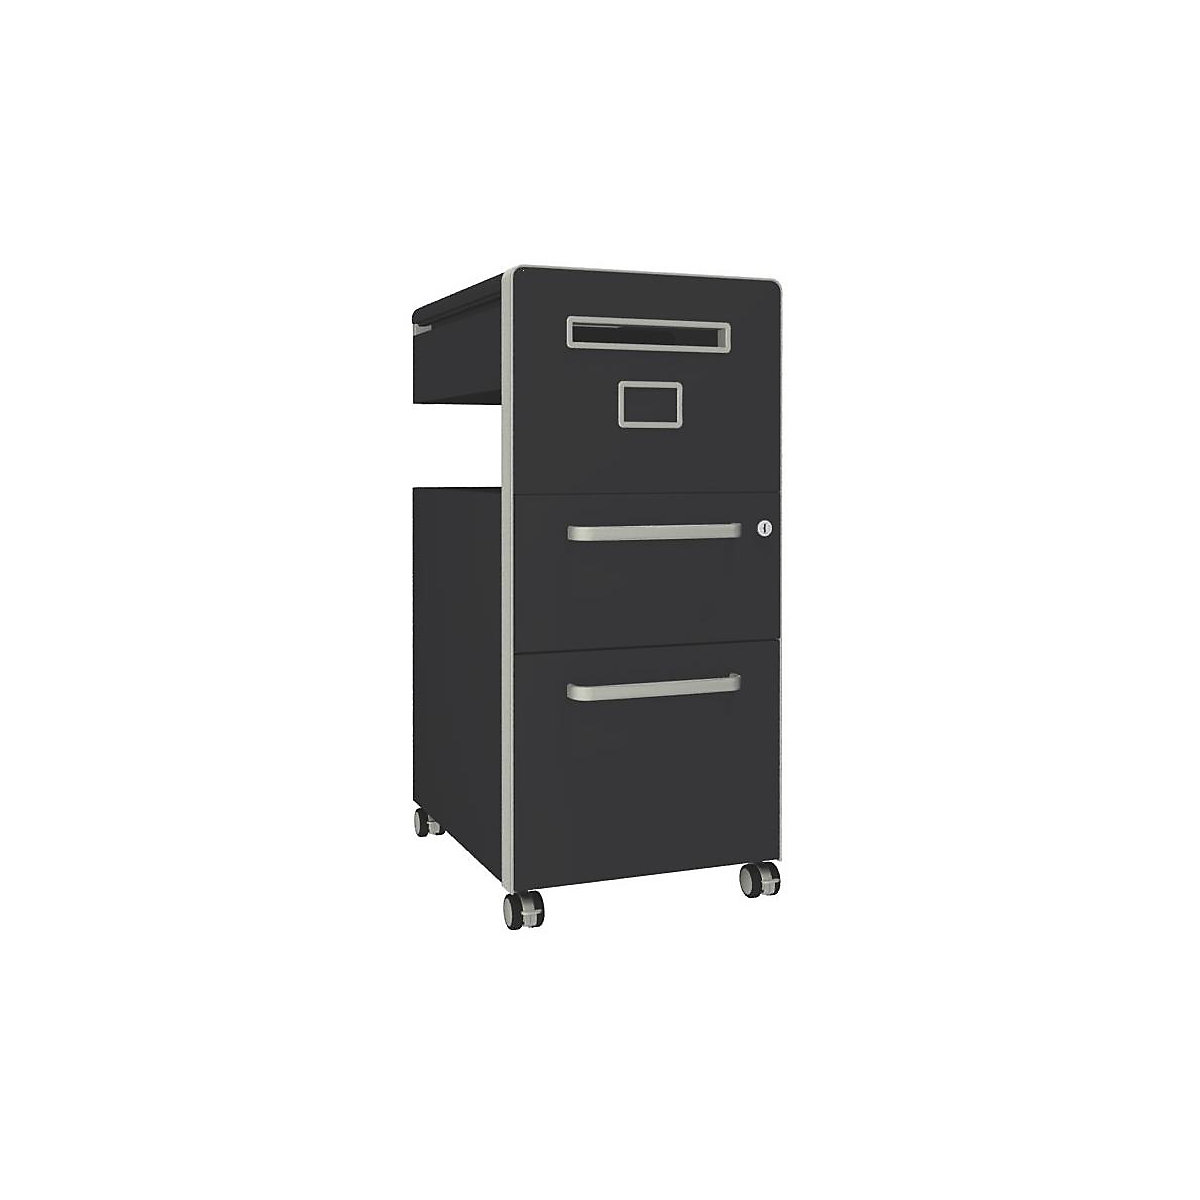 Bite™ pedestal furniture, with 1 whiteboard, opens on the right side – BISLEY, with 1 universal drawer, 1 suspension file drawer, charcoal-22